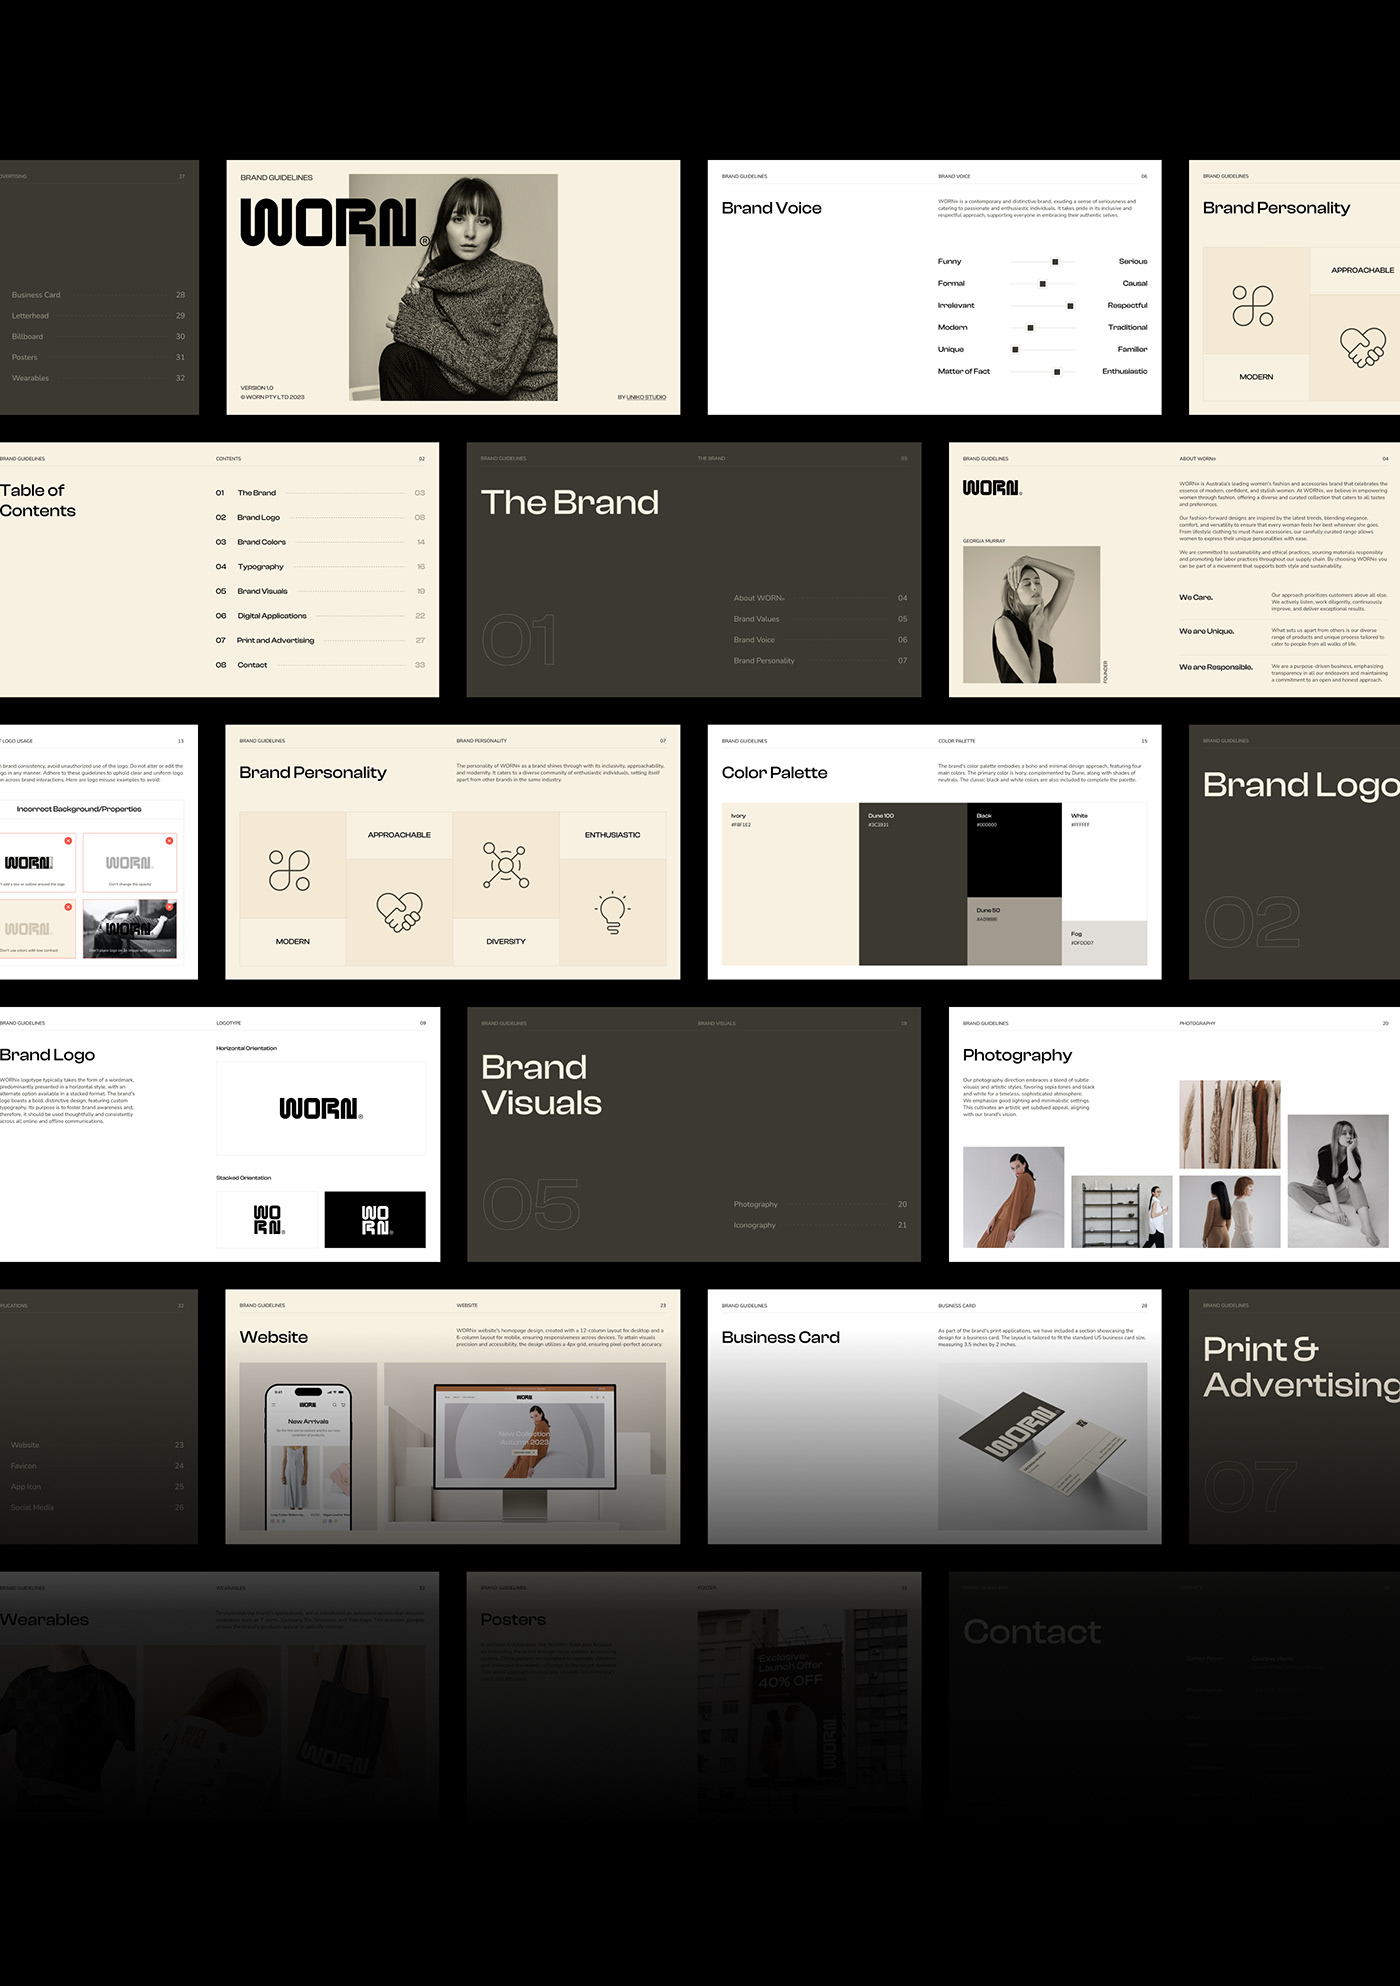 grid of slides from WORN brand guidelines template.